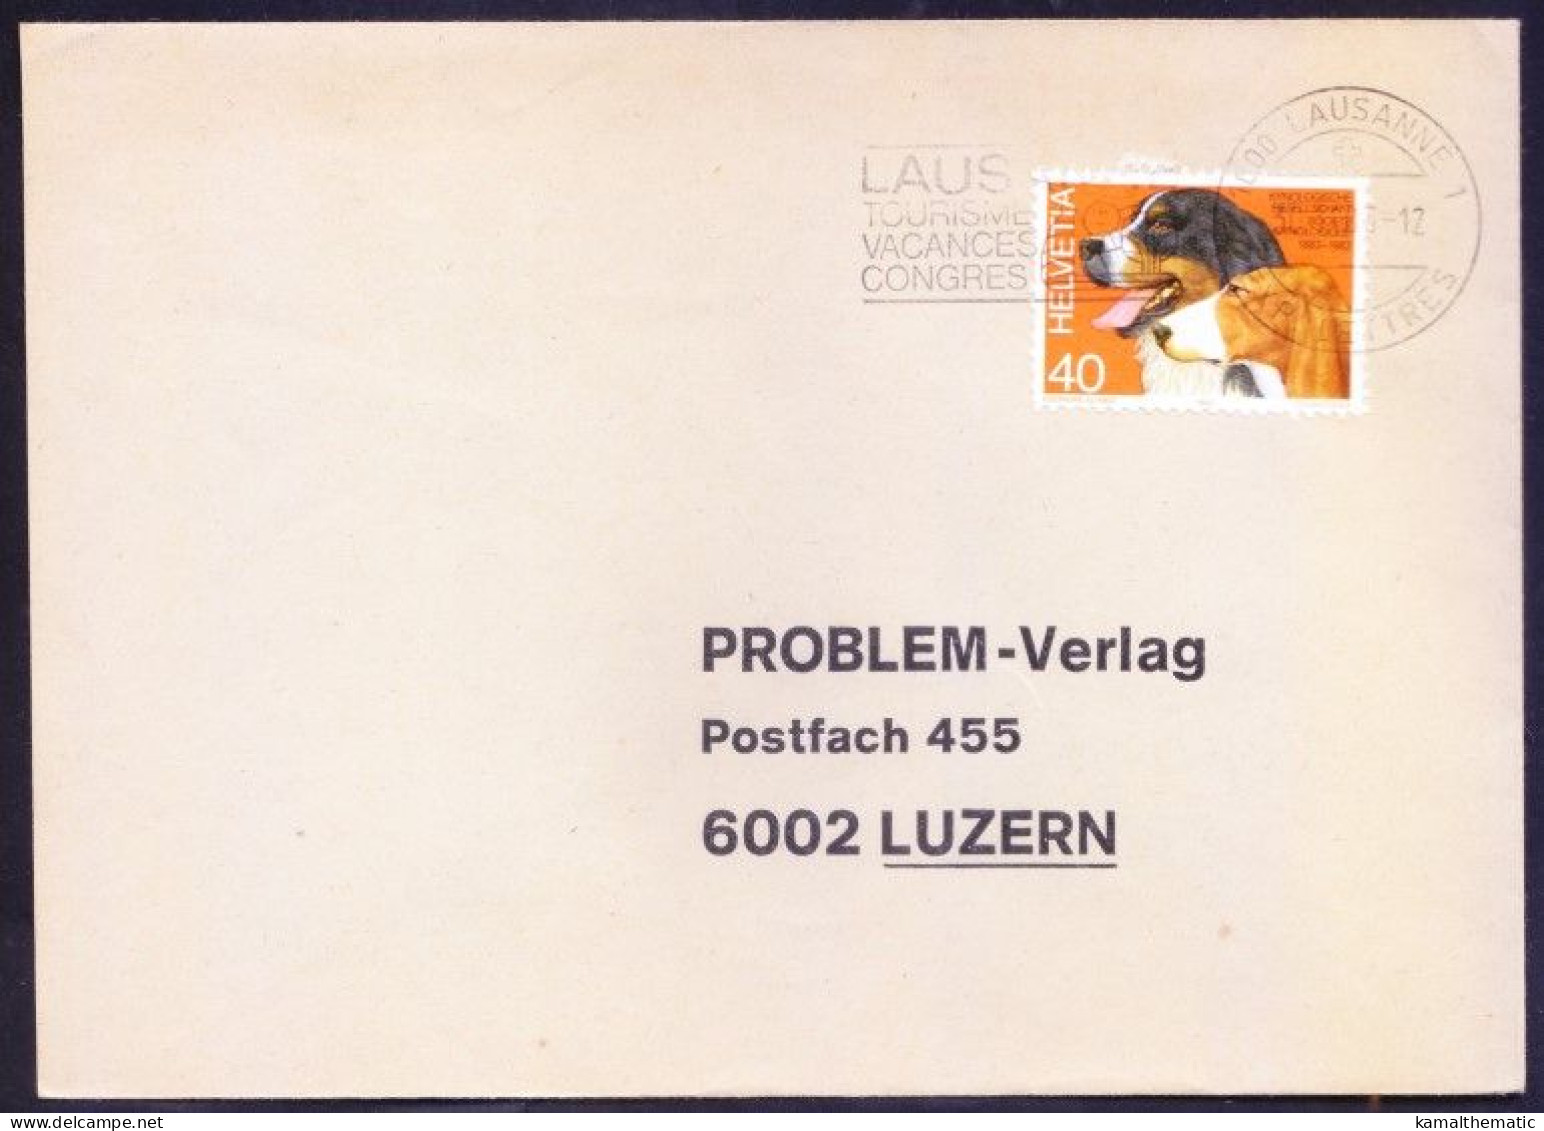 Switzerland 1983 Used Cover With Dogs, Swiss Cynology Society Stamp, Slogan Meter - Dogs